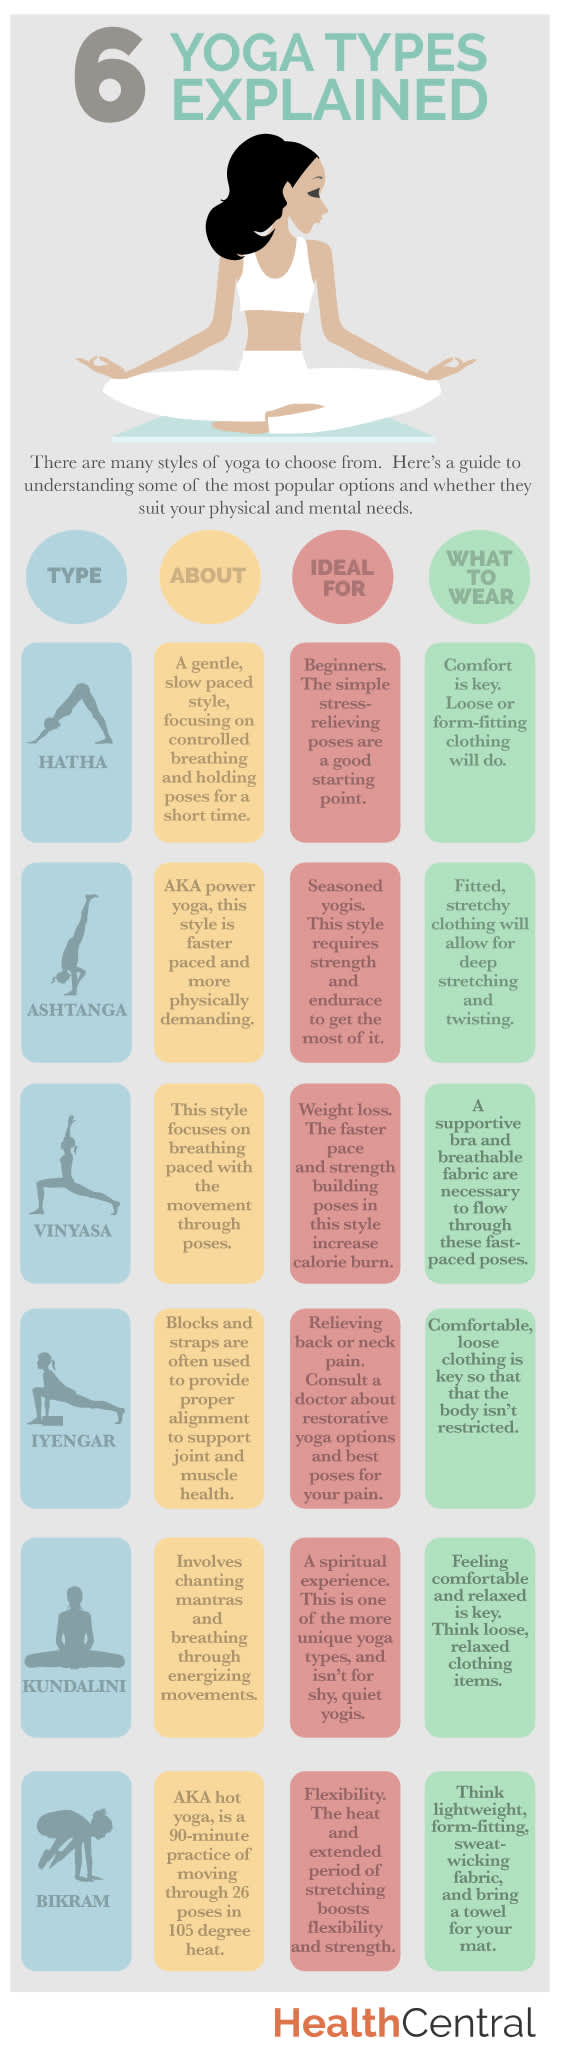 6-yoga-types-explained-infographic-diet-exercise